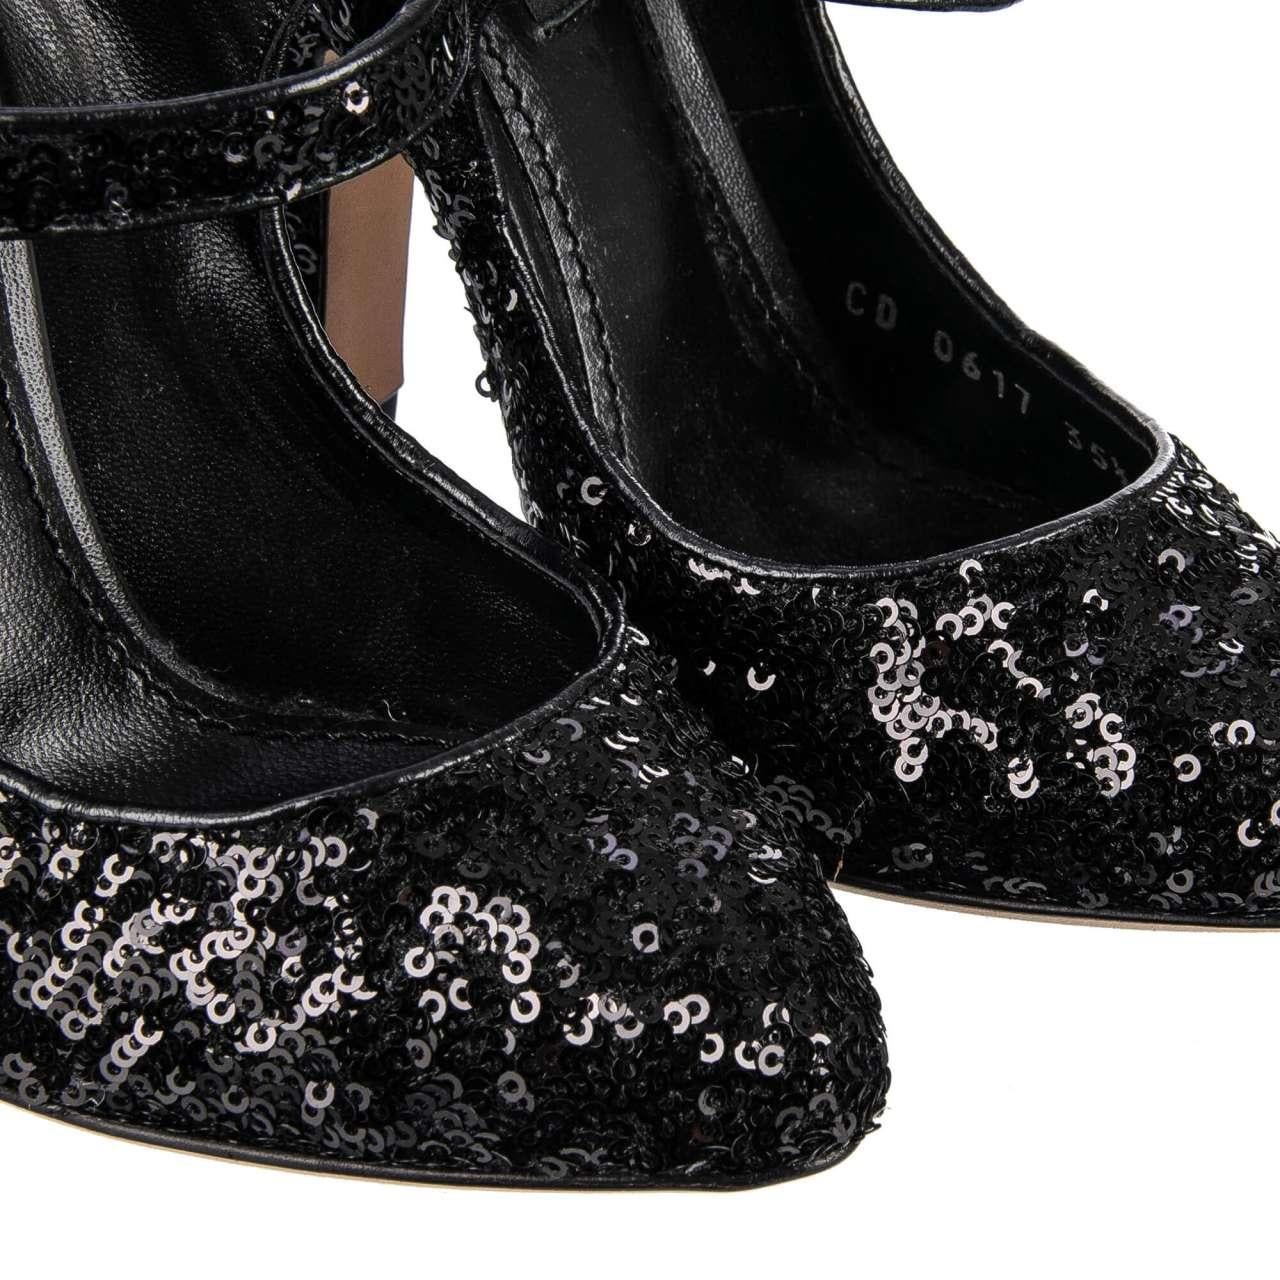 - Sequined Mary Jane Pumps VALLY in Black by DOLCE & GABBANA Black Label - RUNWAY - Dolce & Gabbana Fashion Show - Former RRP: EUR 495 - MADE IN ITALY - New with box - Model: CD0617-AE427-8B956 - Material: 68% Polyester, 32% Lambskin - Inside